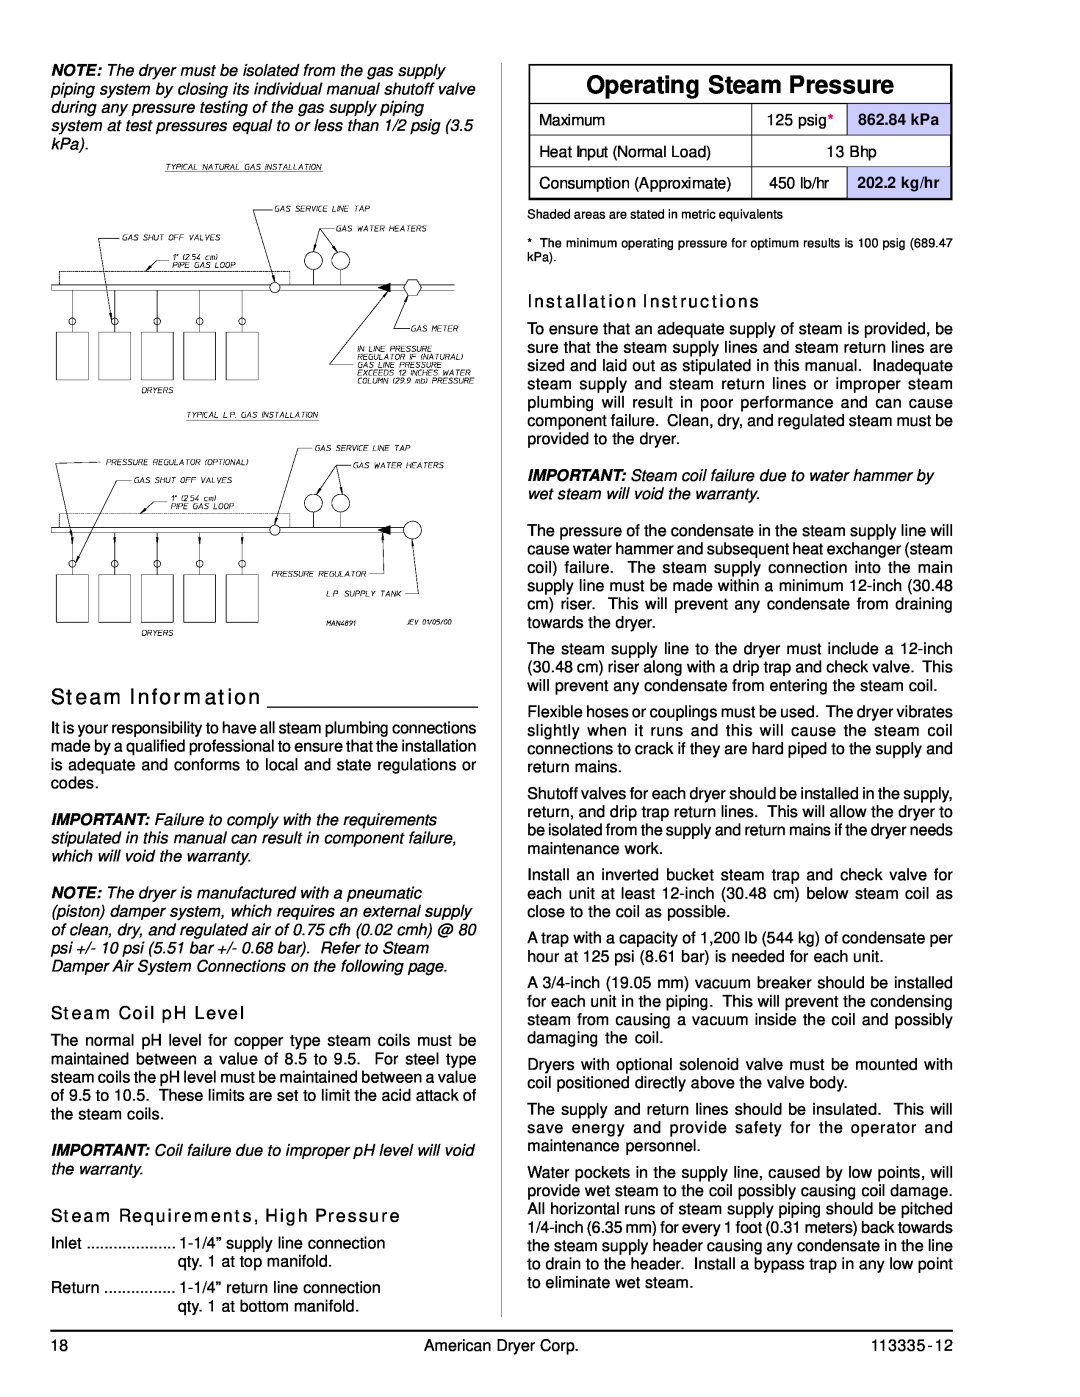 American Dryer Corp ML-130 III Operating Steam Pressure, Steam Information, Steam Coil pH Level, Installation Instructions 